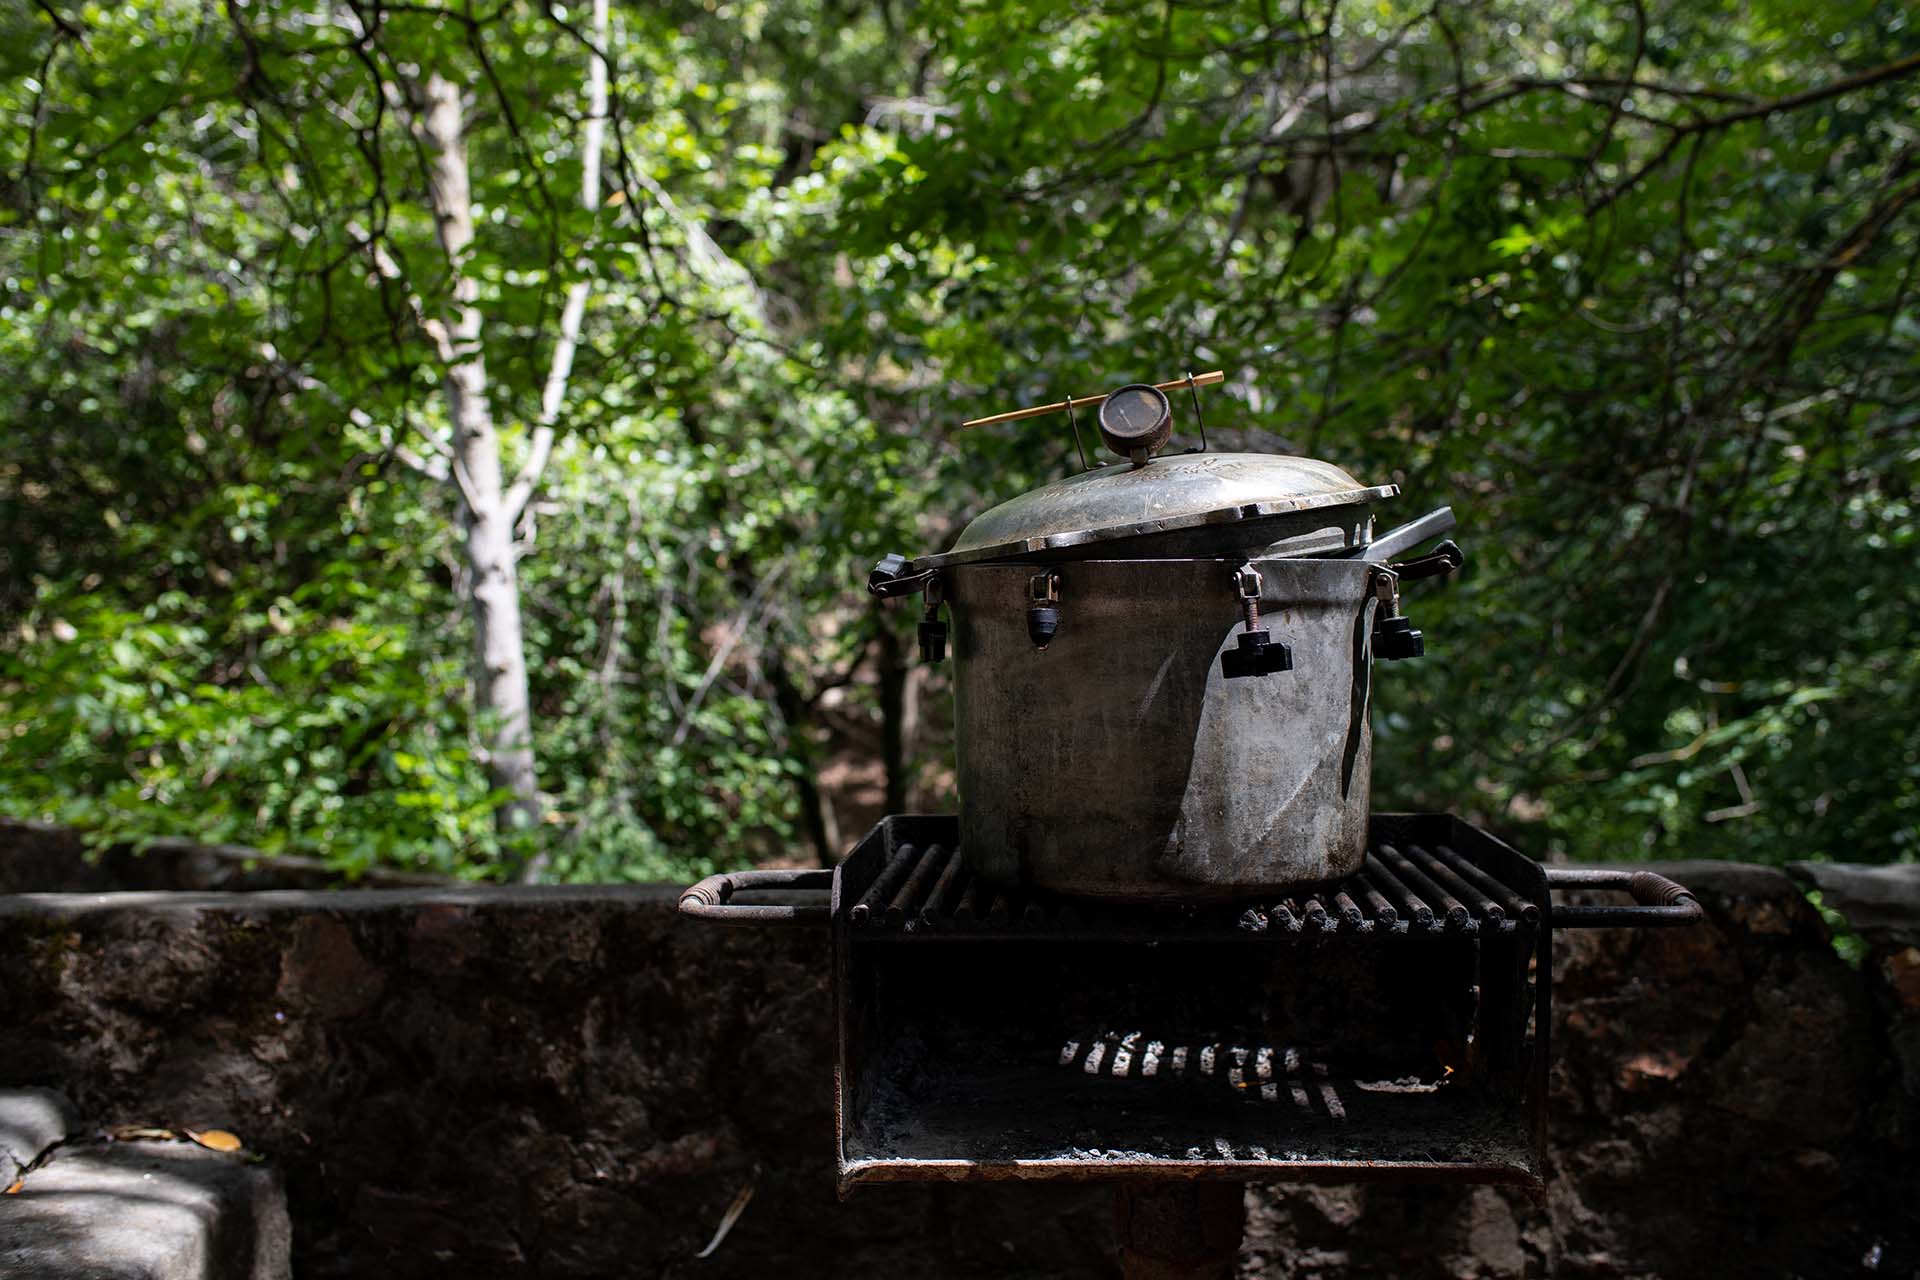 An old pressure cooking sitting on a grill grate, with trees in the background.